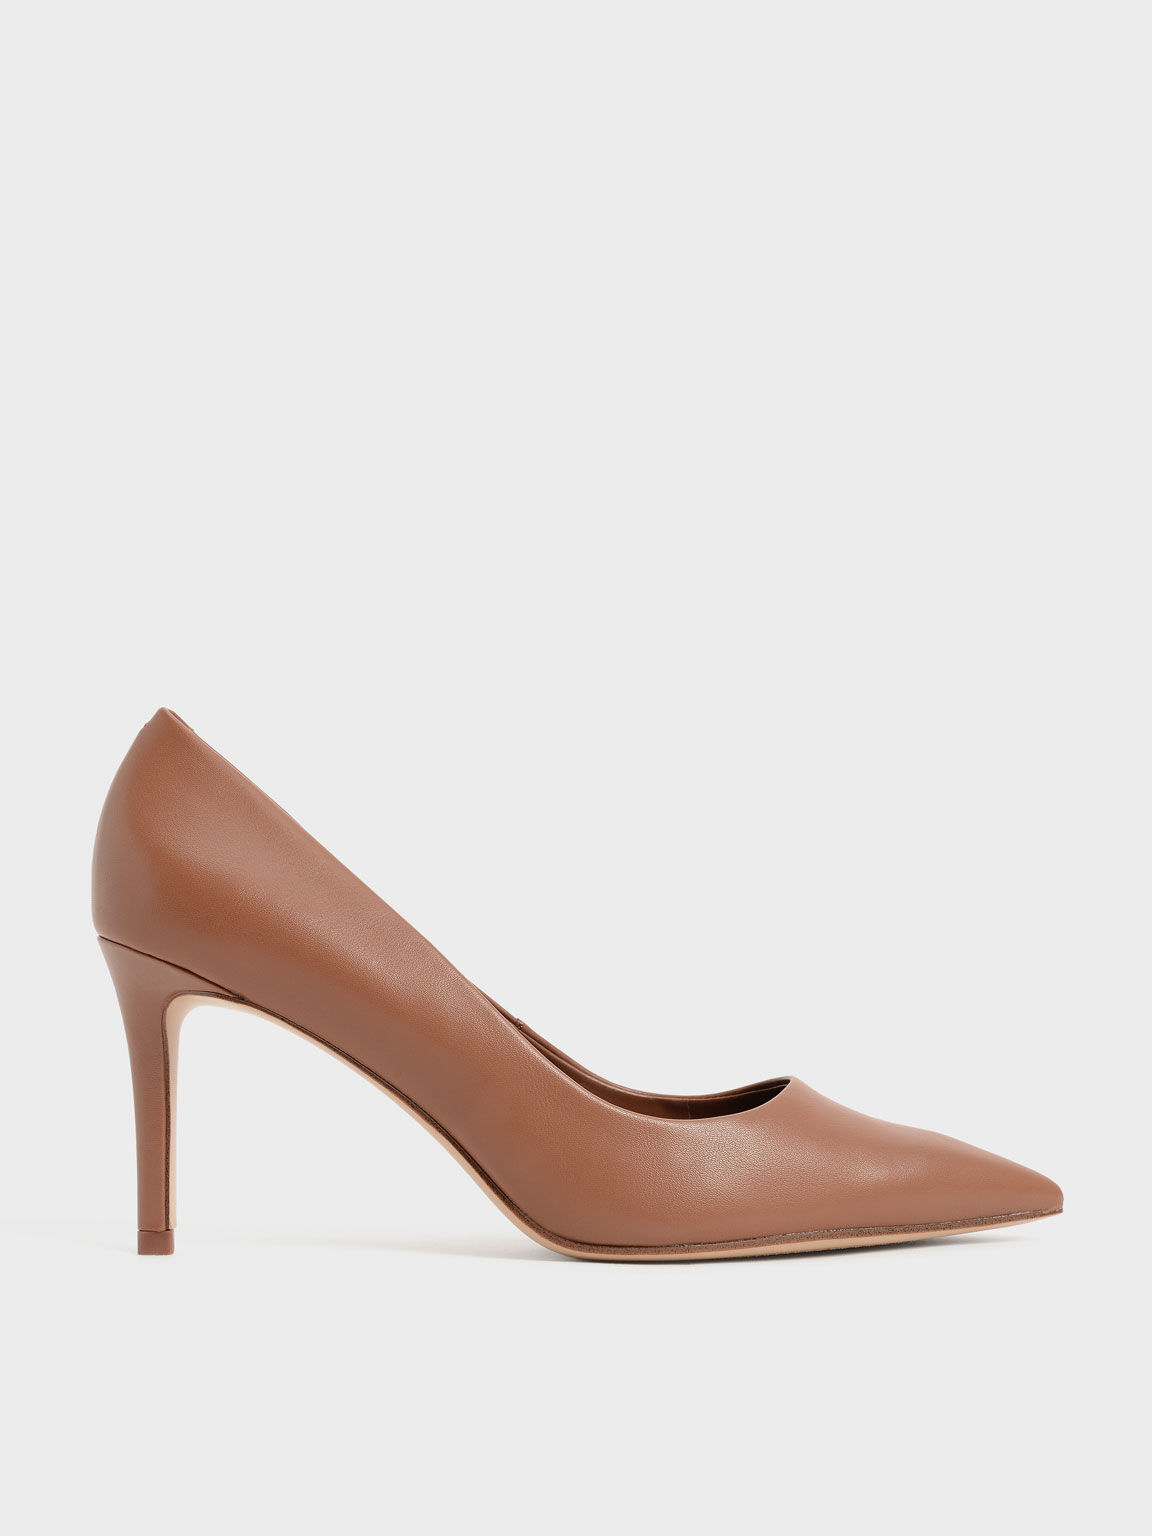 Pointed Toe Stiletto Pumps, Brown, hi-res